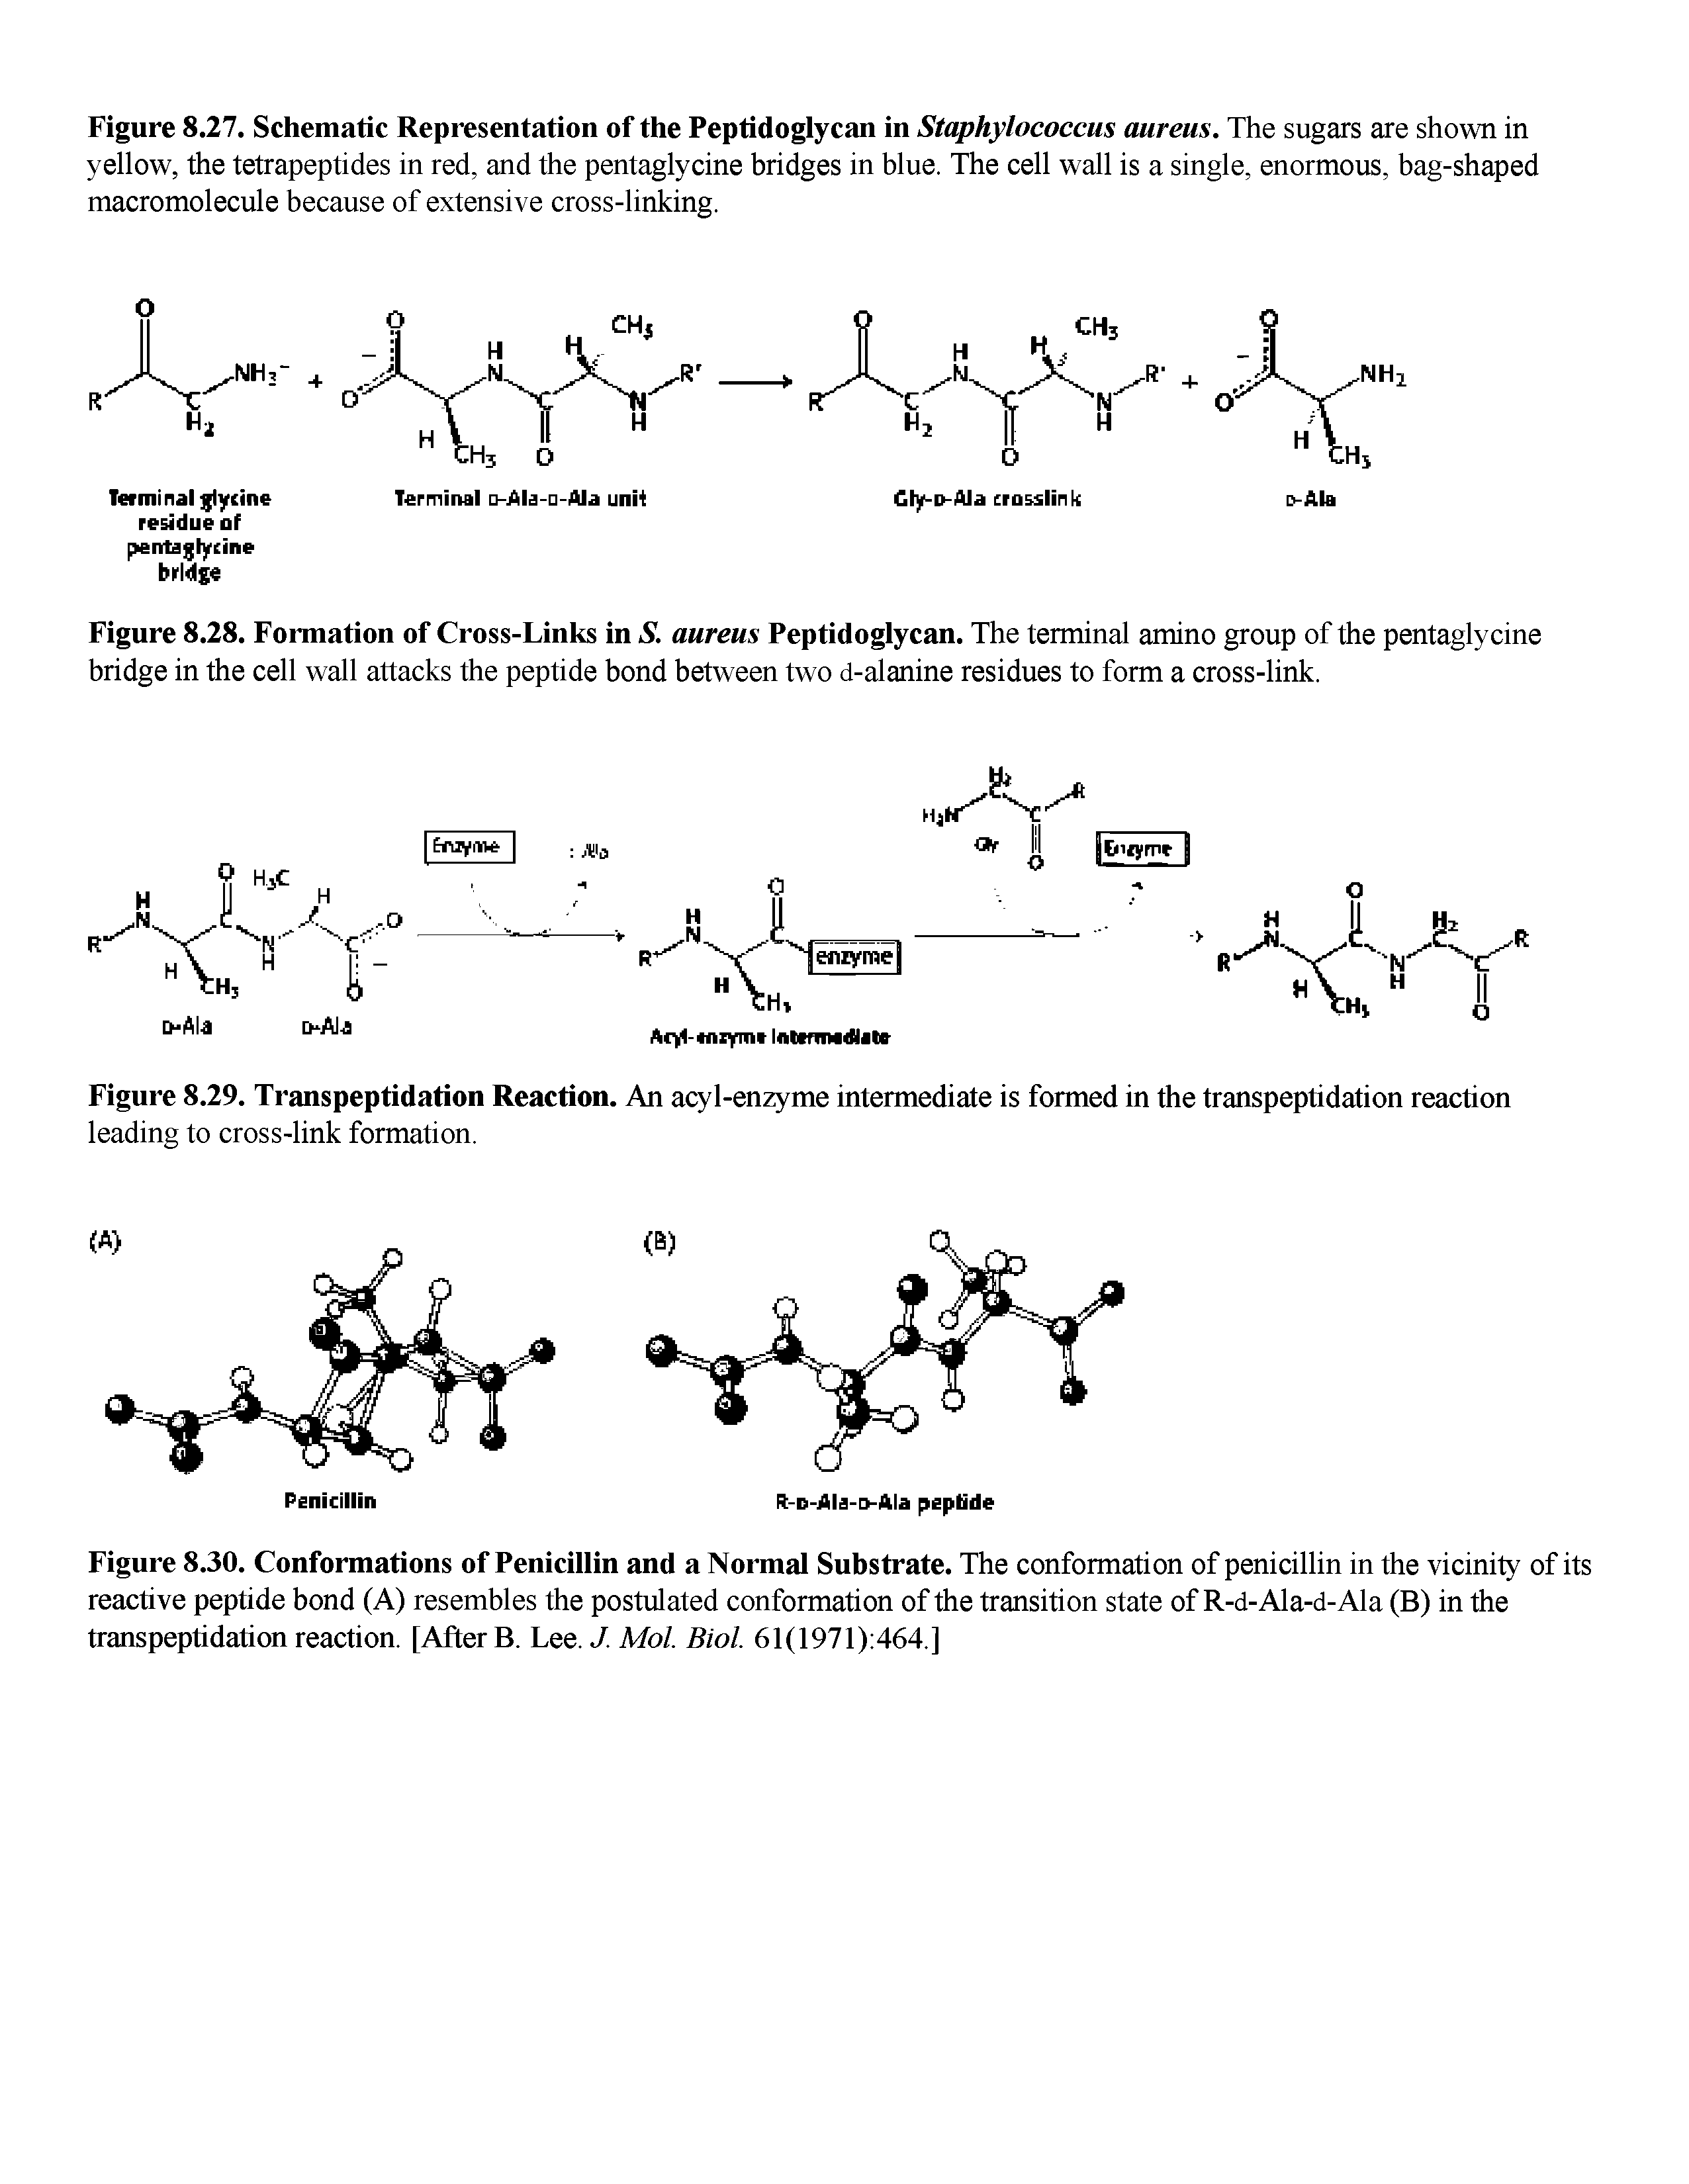 Figure 8.30. Conformations of Penicillin and a Normal Substrate. The conformation of penicillin in the vicinity of its reactive peptide bond (A) resembles the postulated conformation of the transition state of R-d-Ala-d-Ala (B) in the transpeptidation reaction. [After B. Lee. J. Mol. Biol. 61(1971) 464.]...